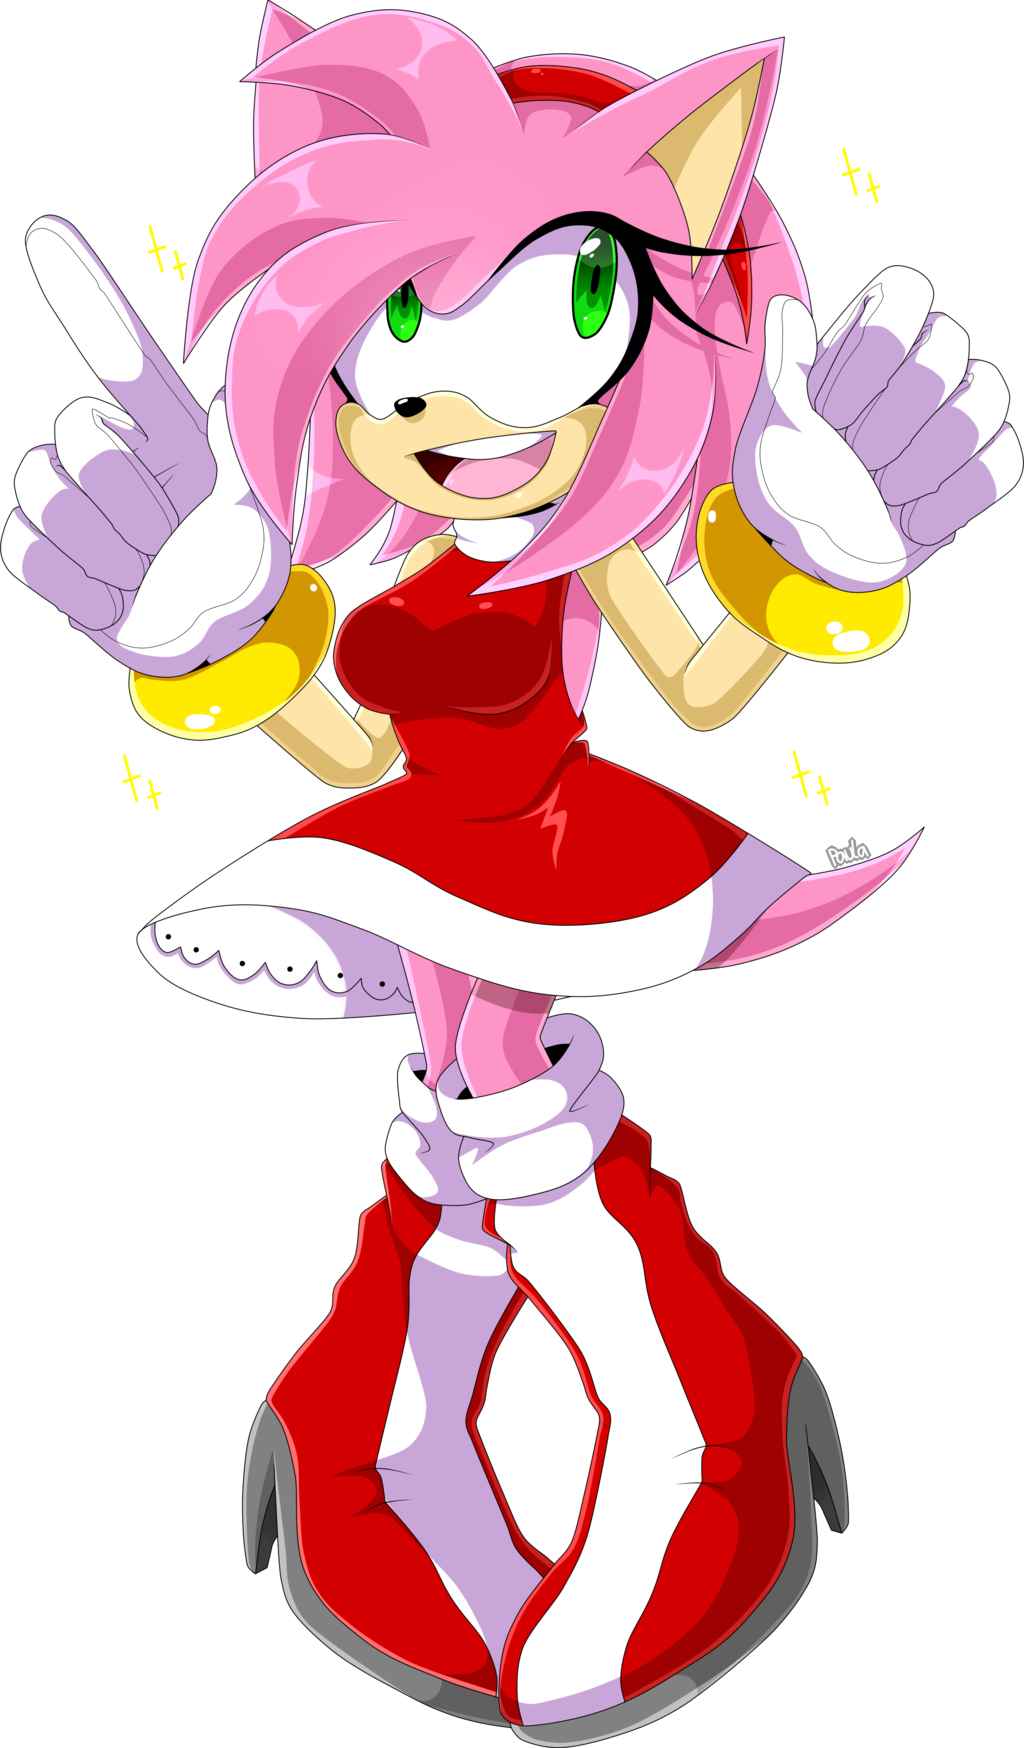 Amy rose sonic the. Hedgehog clipart angry cartoon